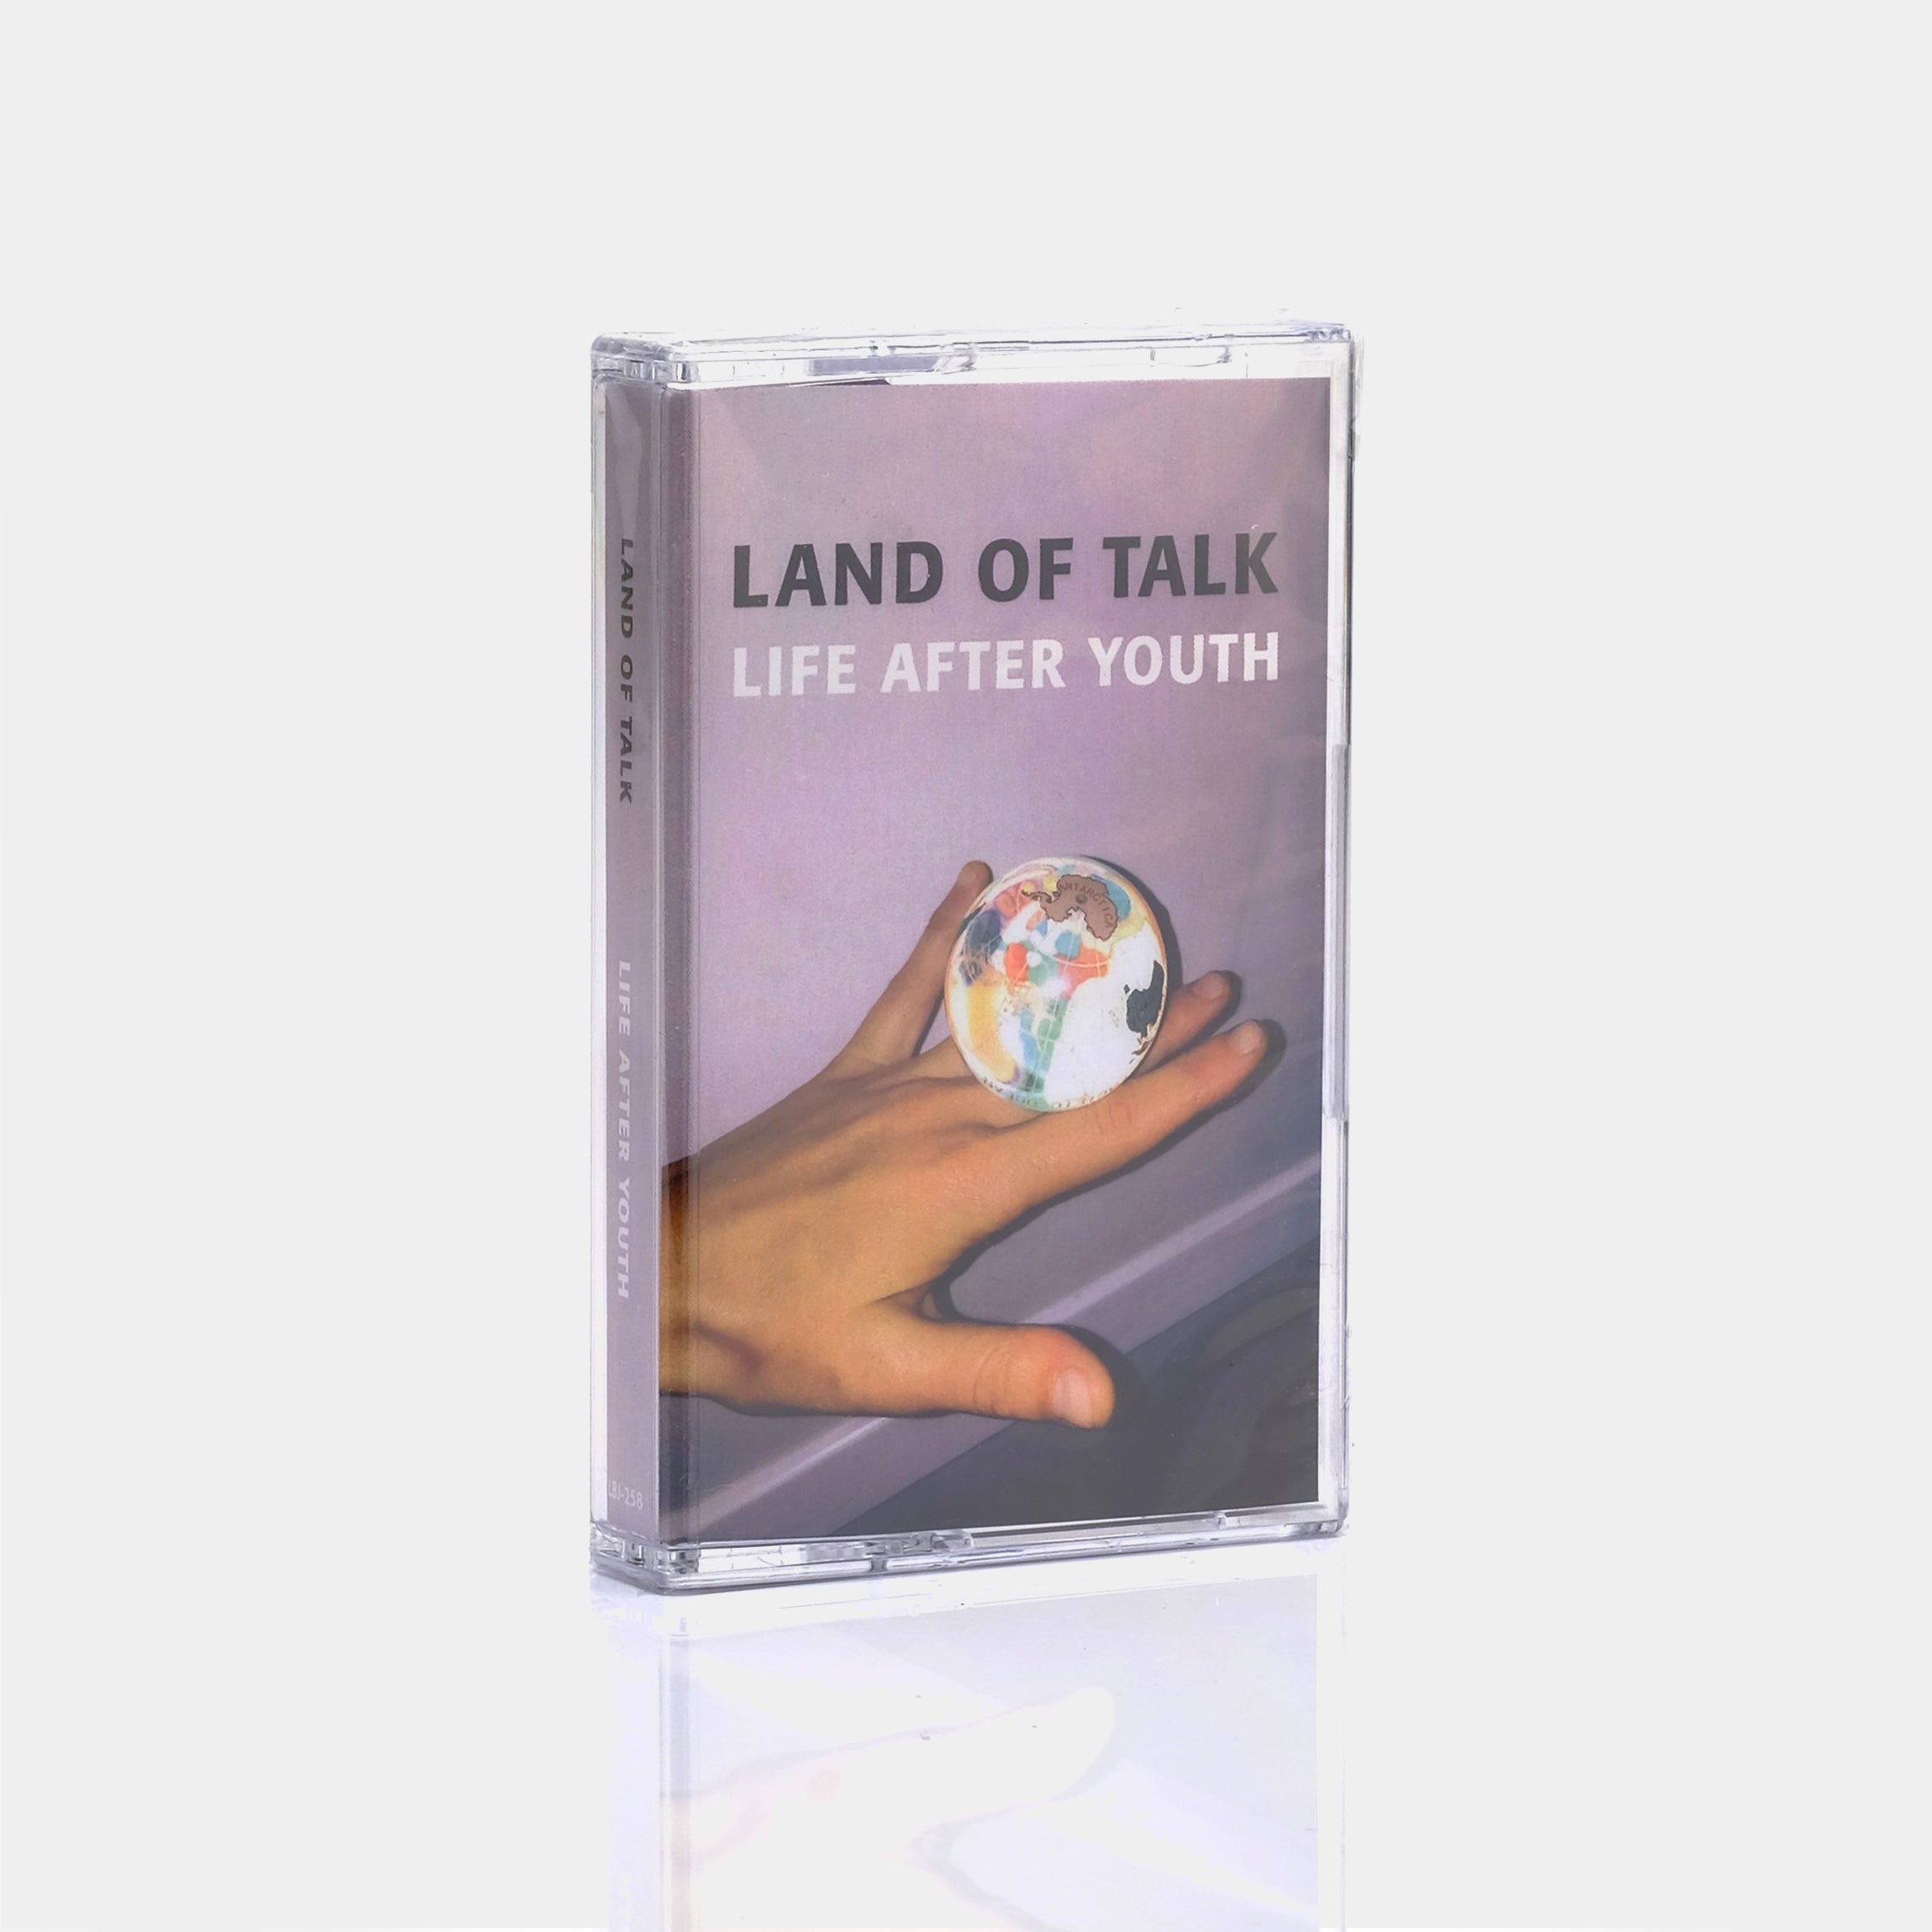 Land of Talk - Life After Youth Cassette Tape